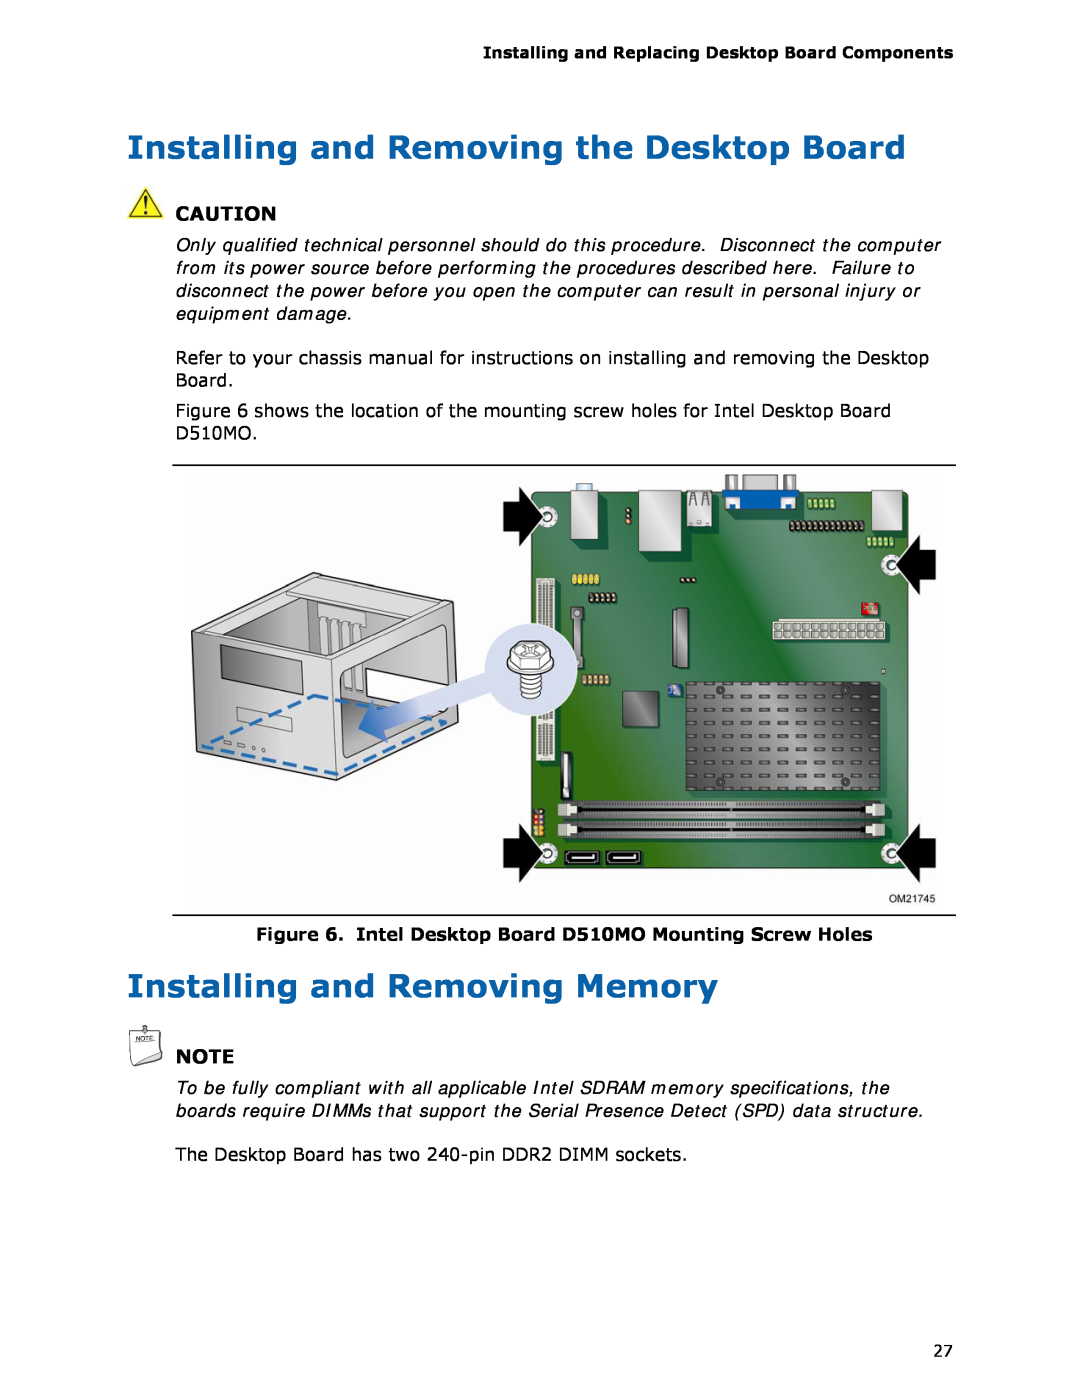 Intel D510MO manual Installing and Removing the Desktop Board, Installing and Removing Memory 